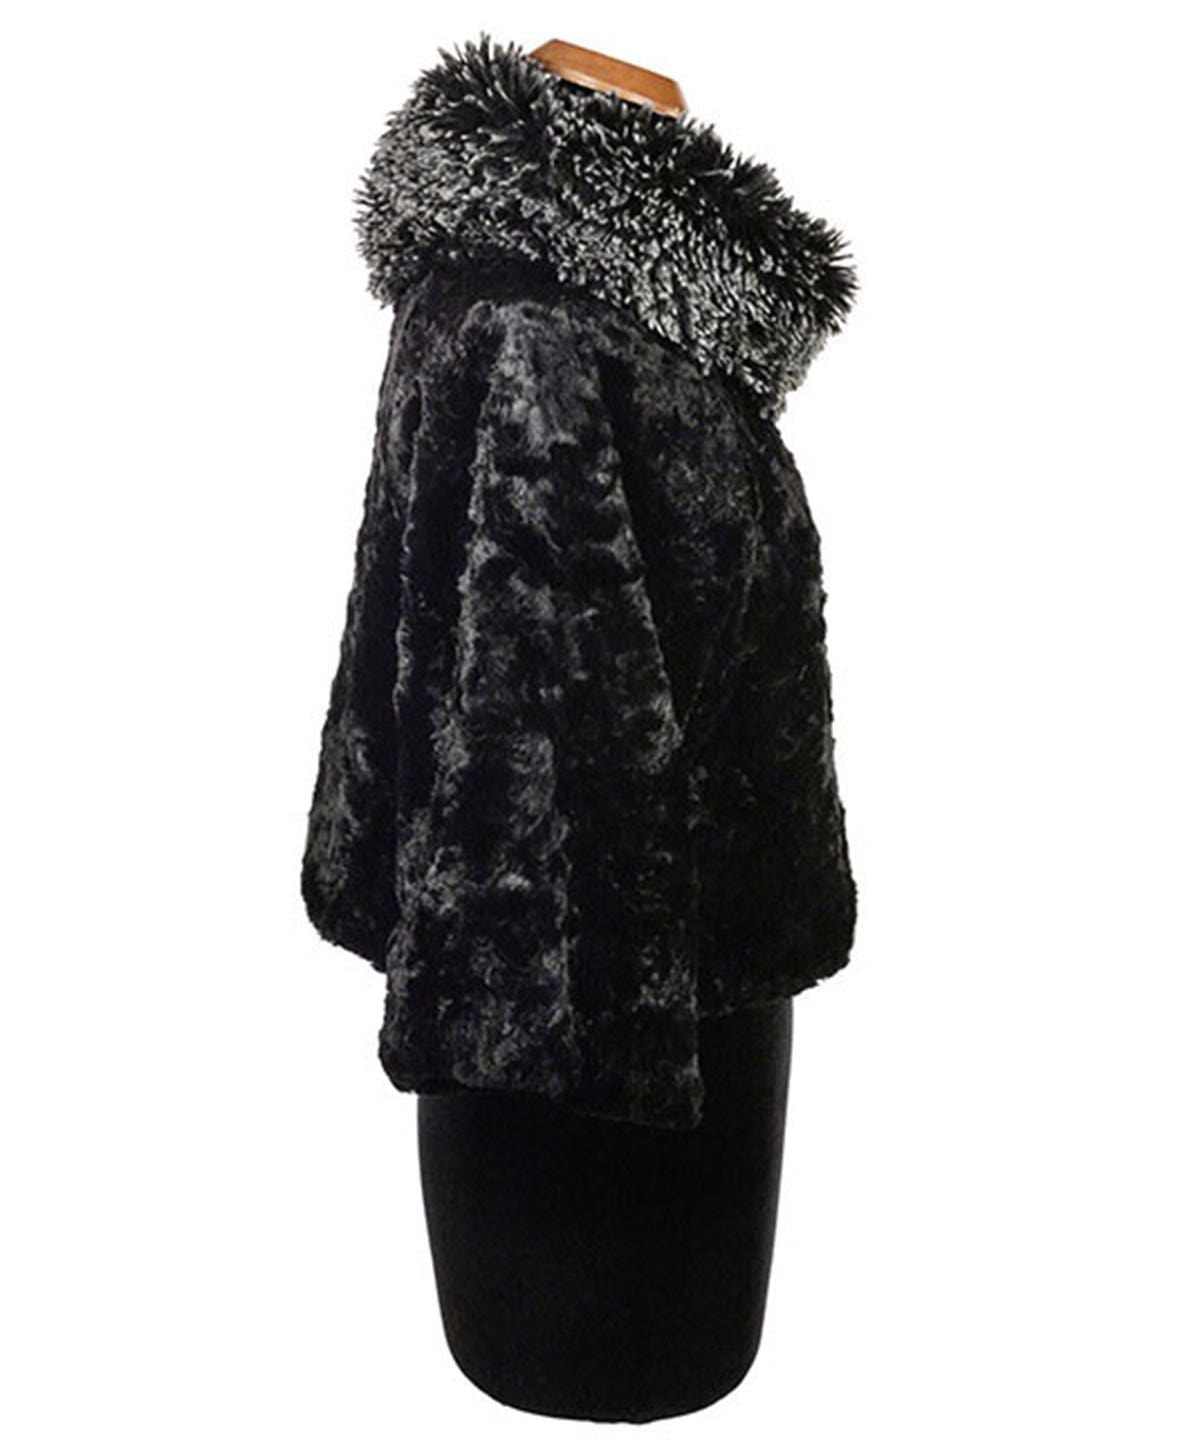 Sweater Top - Cuddly Faux Fur in Black with Fox Collar